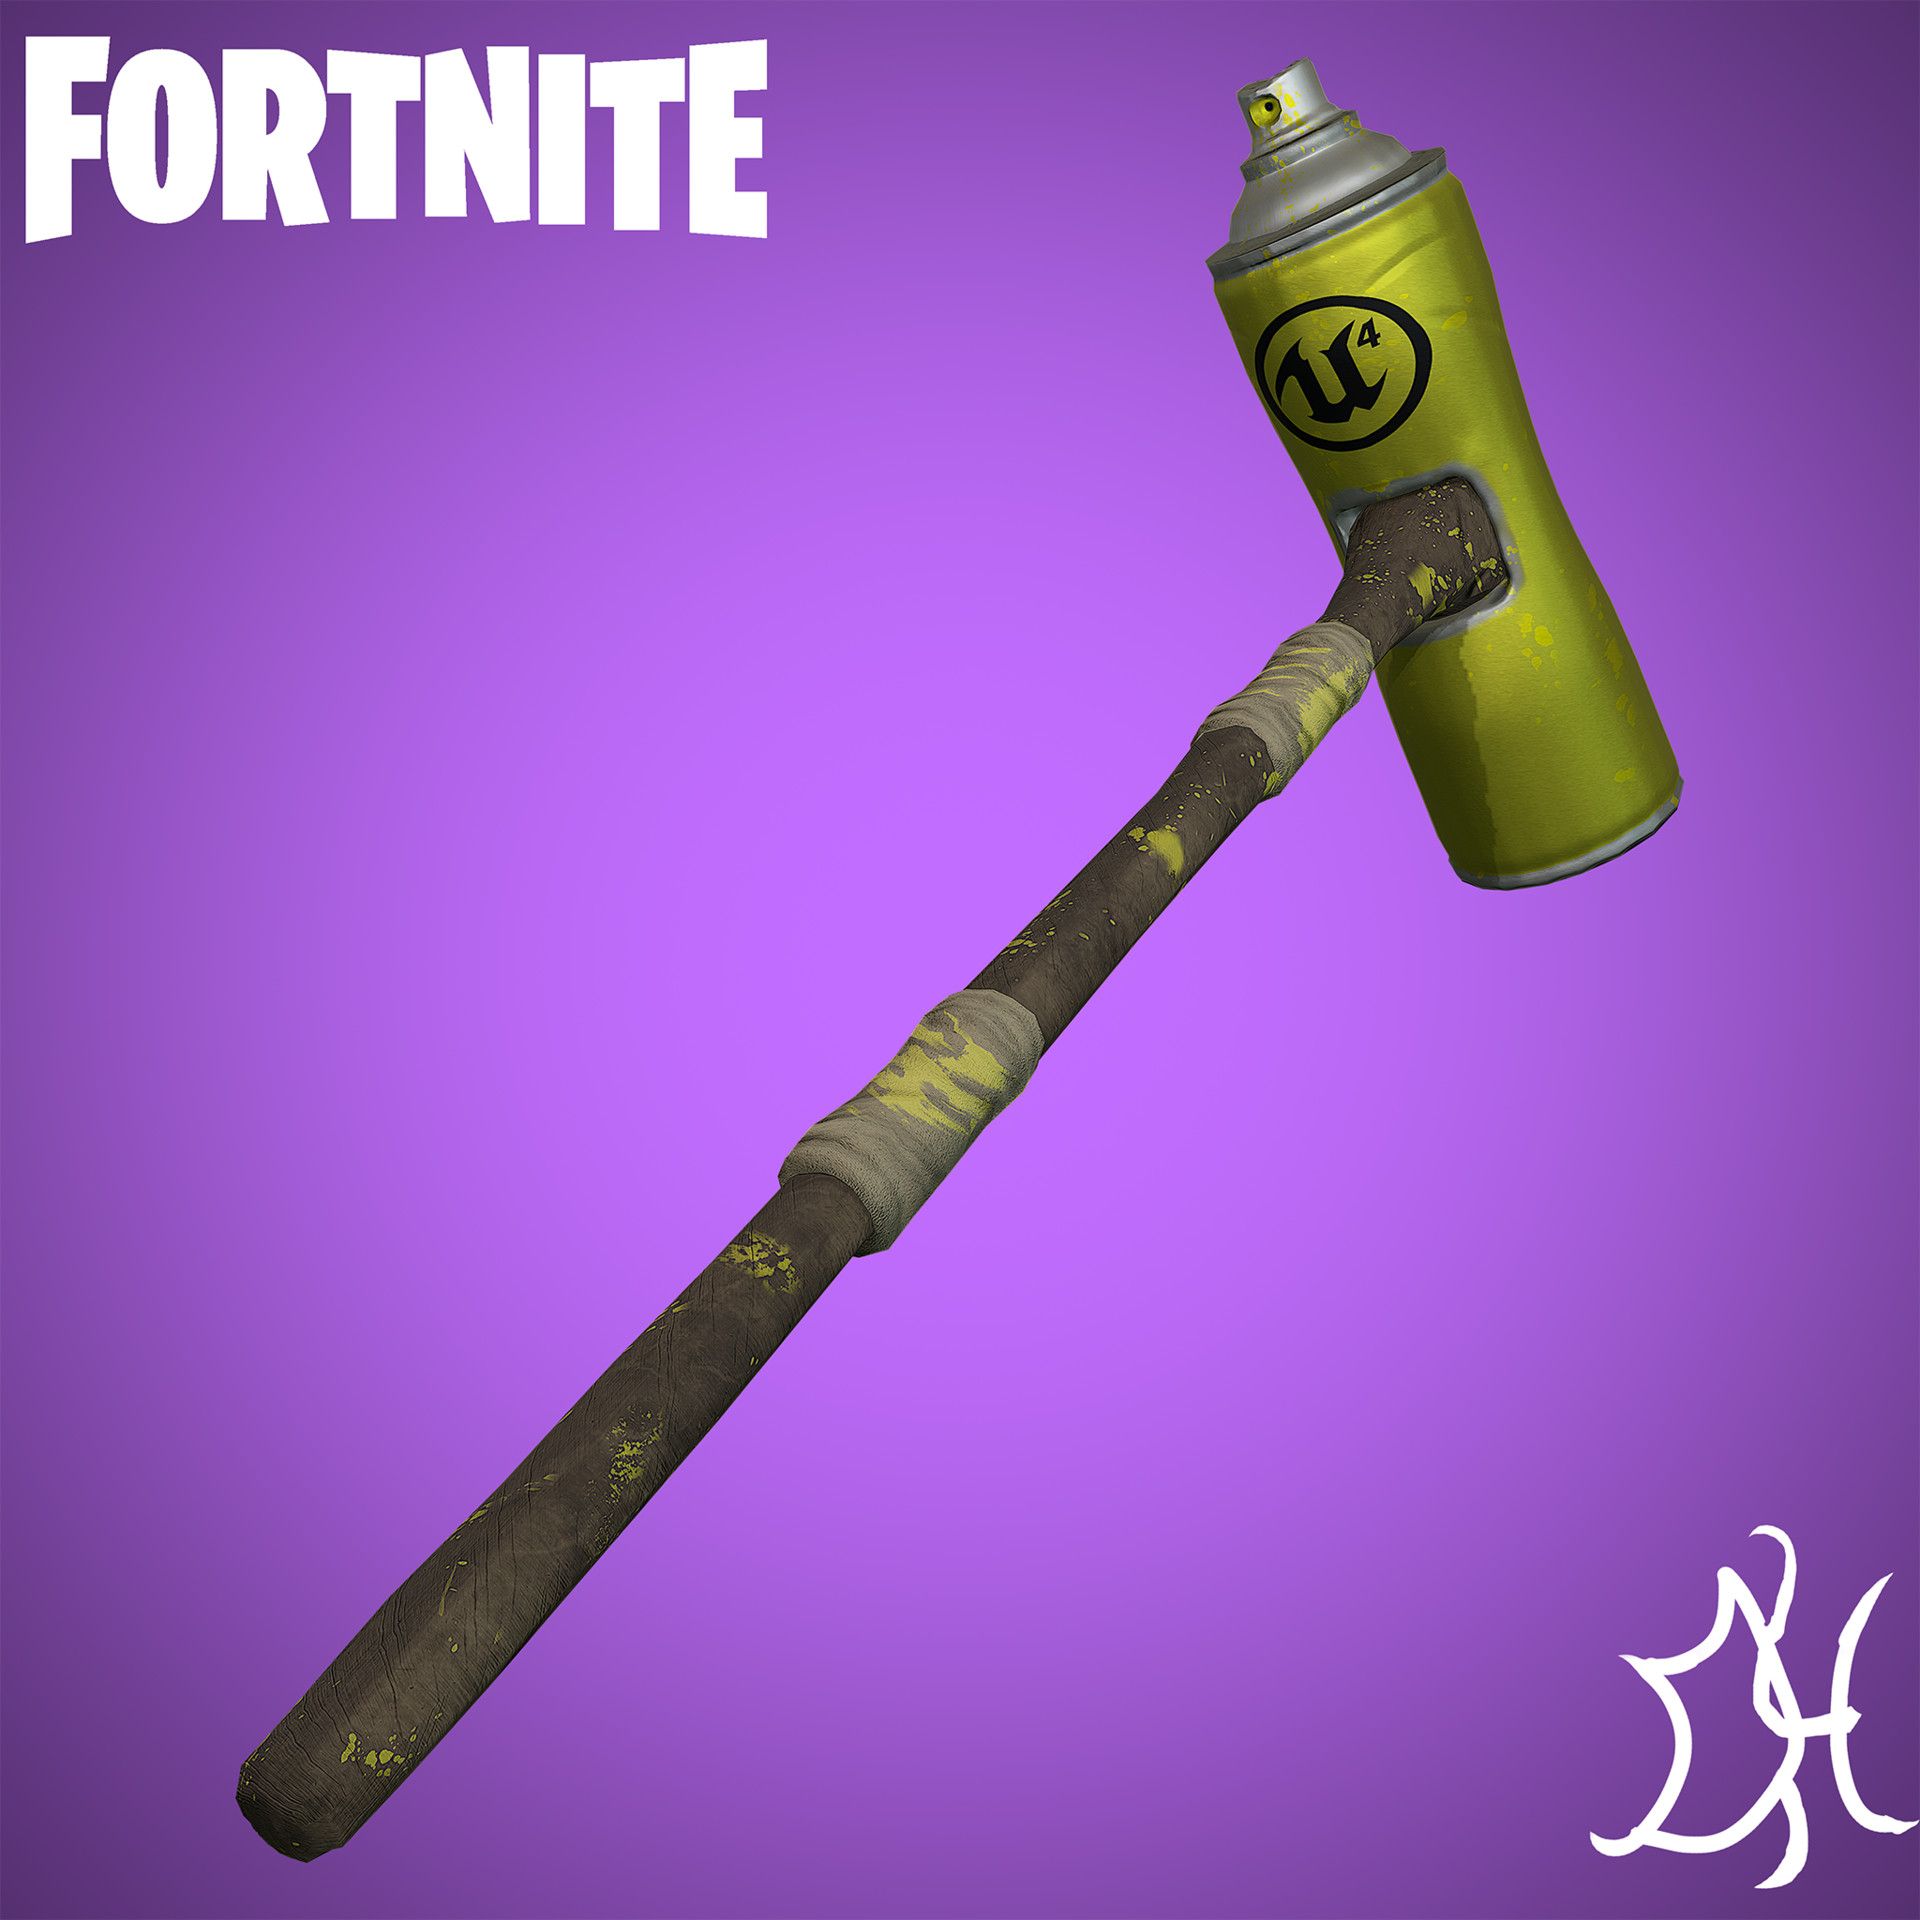 How To Make A Fortnite Pickaxe Out Of Cardboard Fortnite Season 9 Skins Battle Pass Names